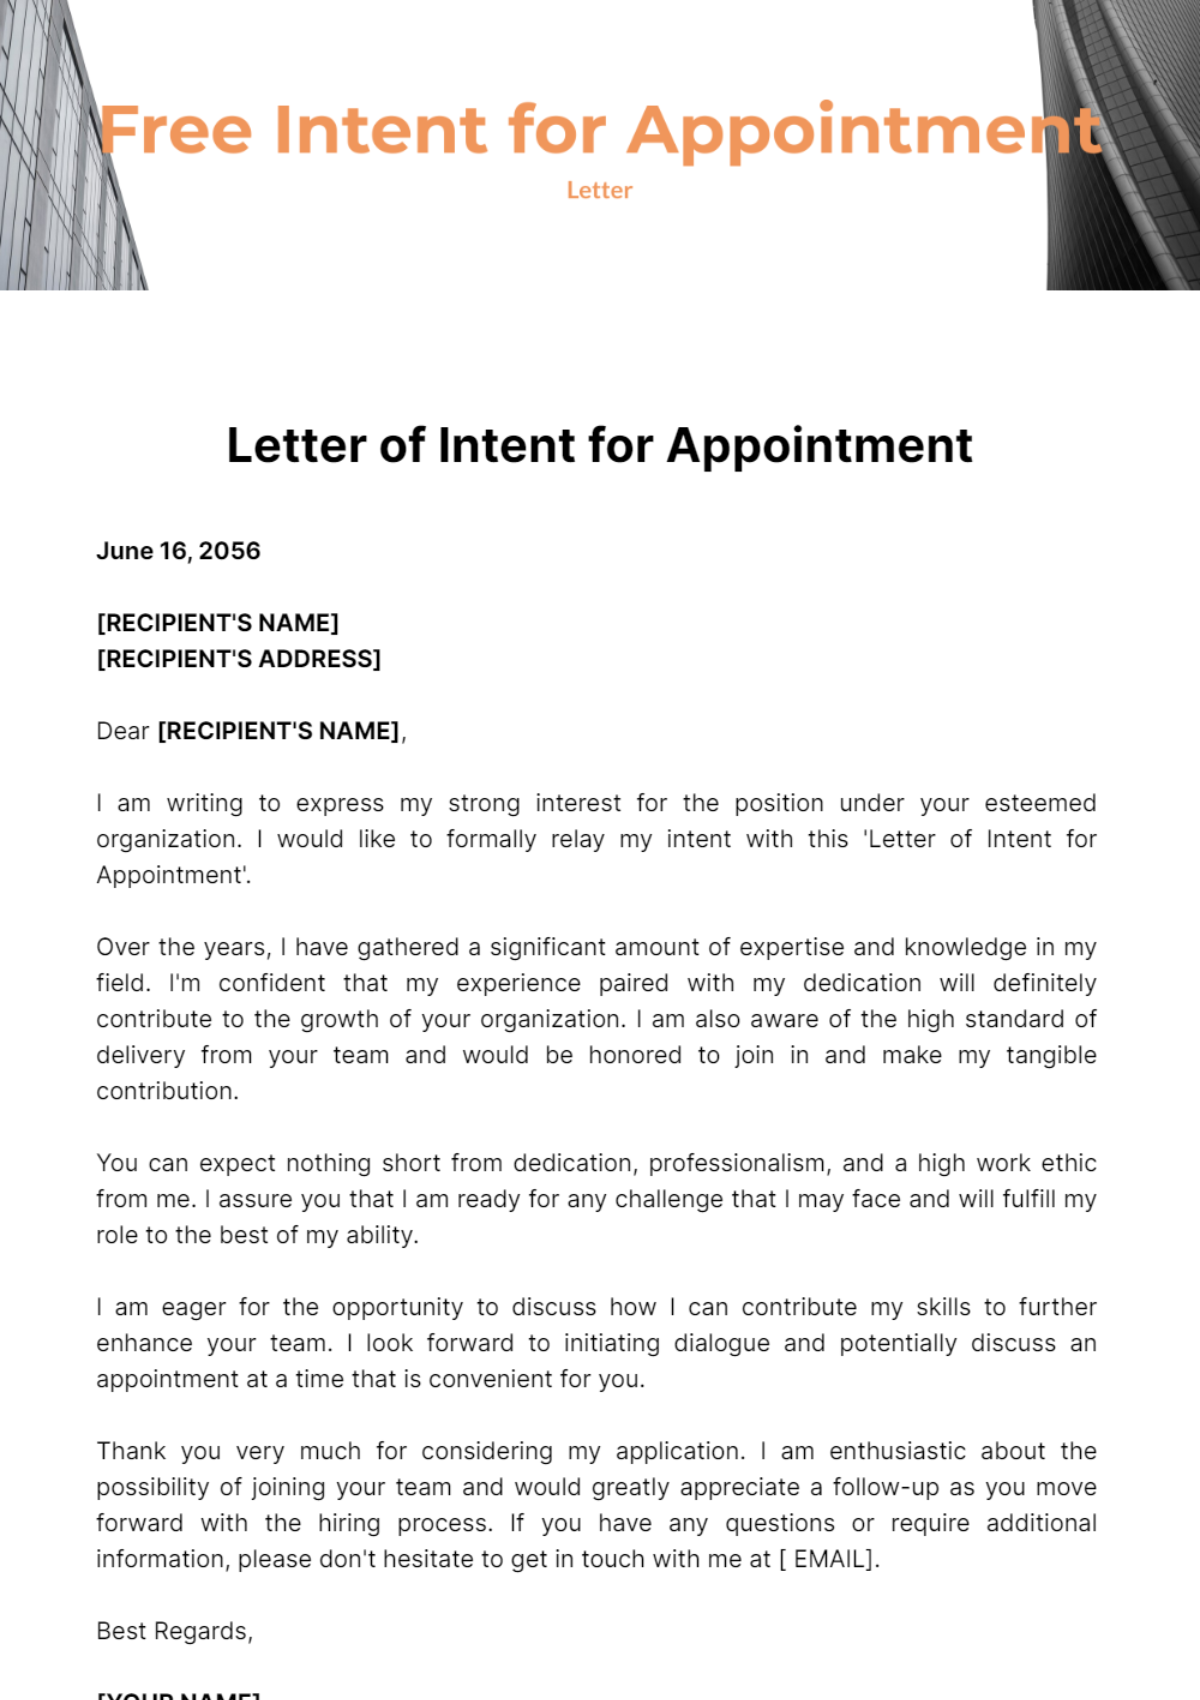 Free Letter of Intent for Appointment Template